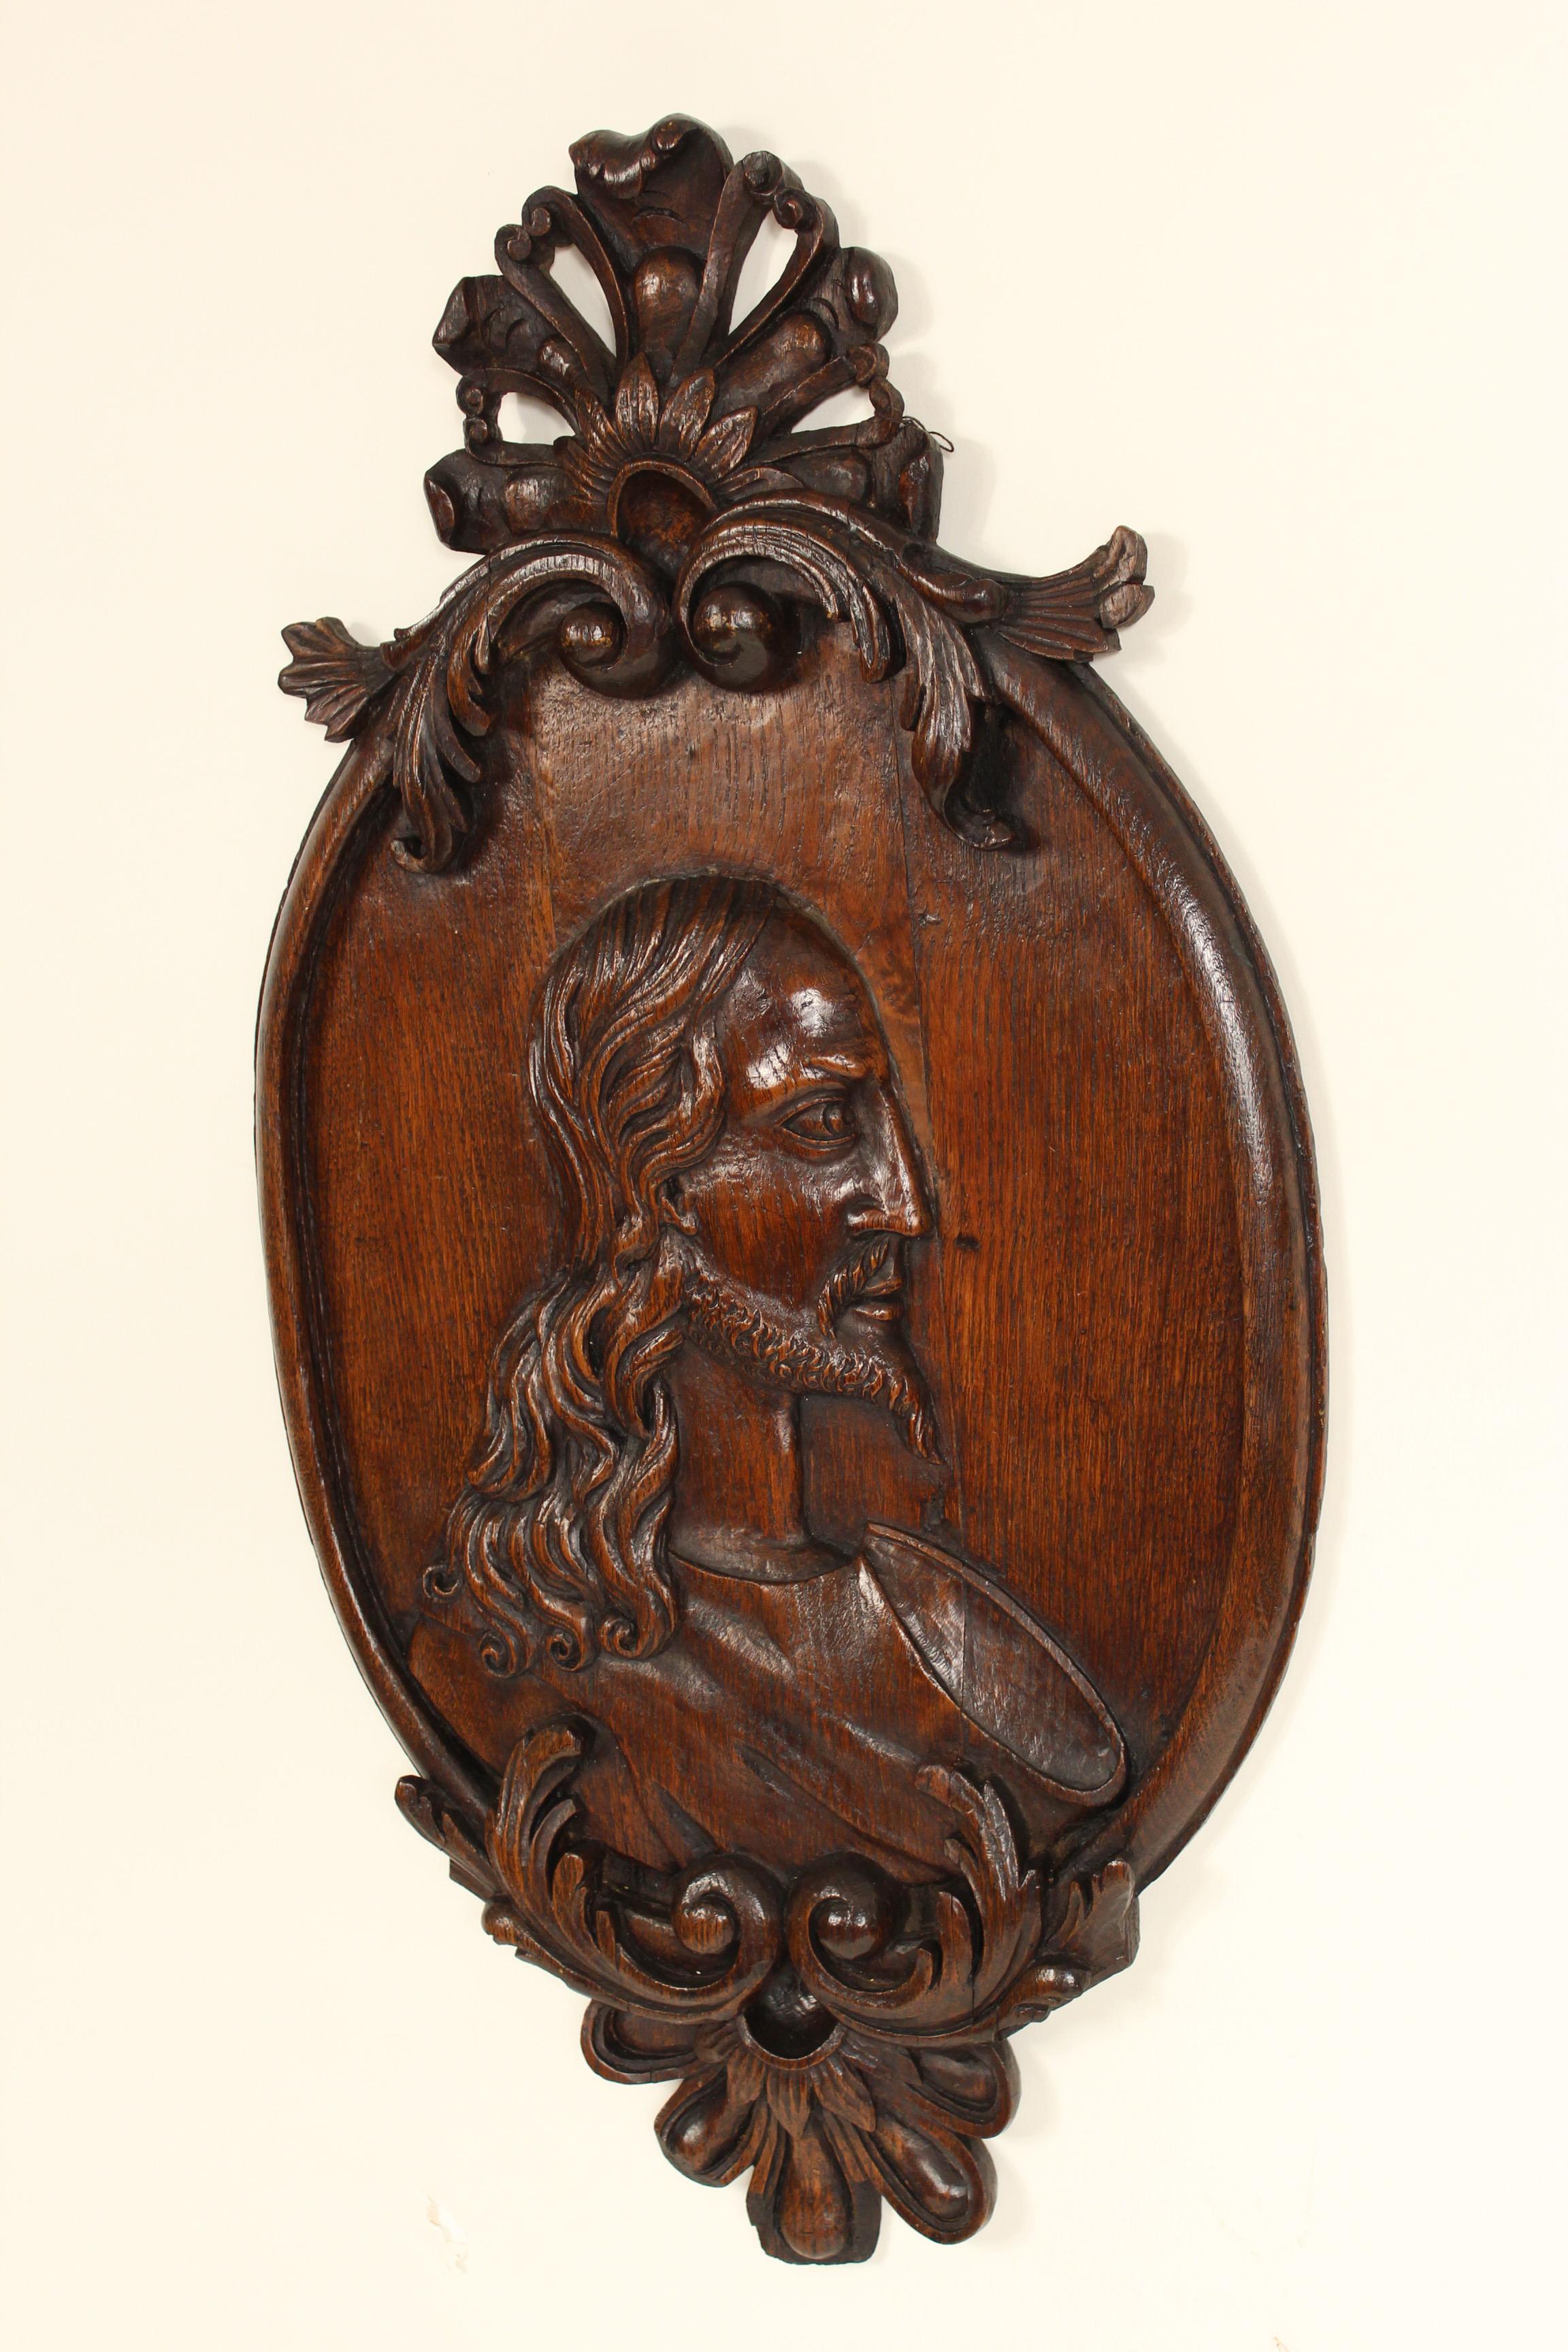 Carved oak religious carving, 19th century. This is an excellent quality wood carving with a nice old patina.